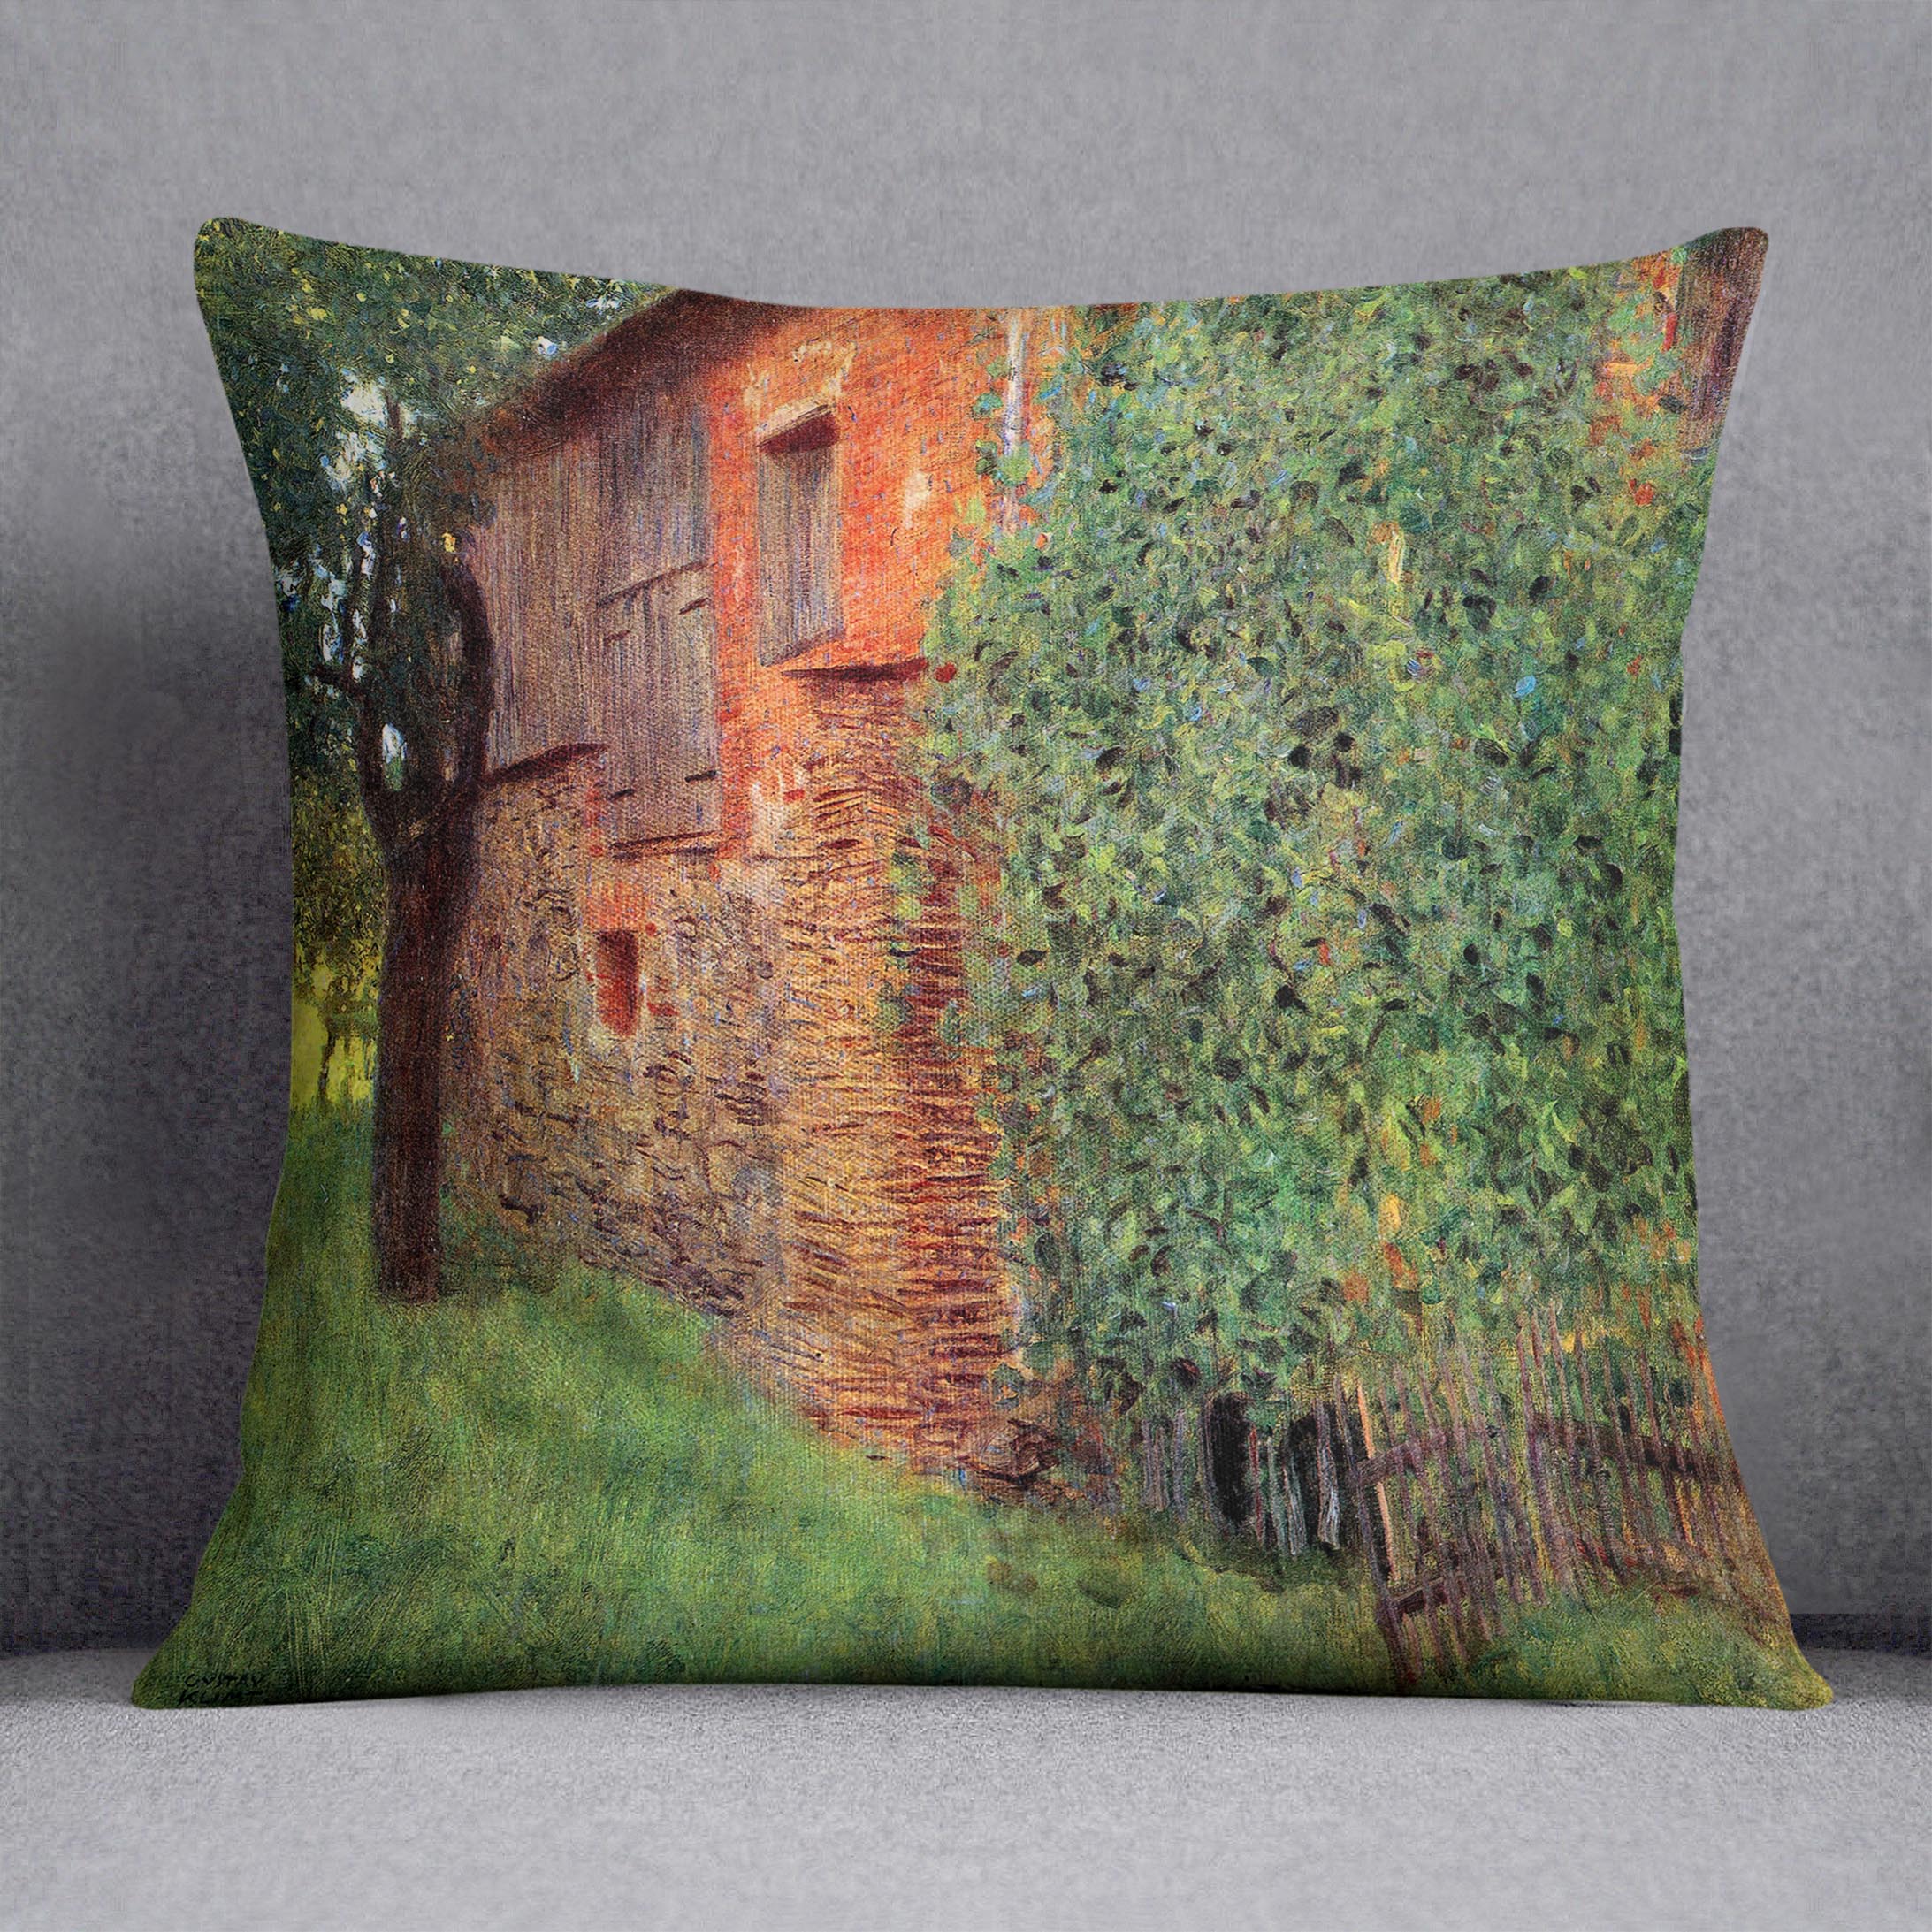 Farmhouse in Chamber in Attersee by Klimt Cushion